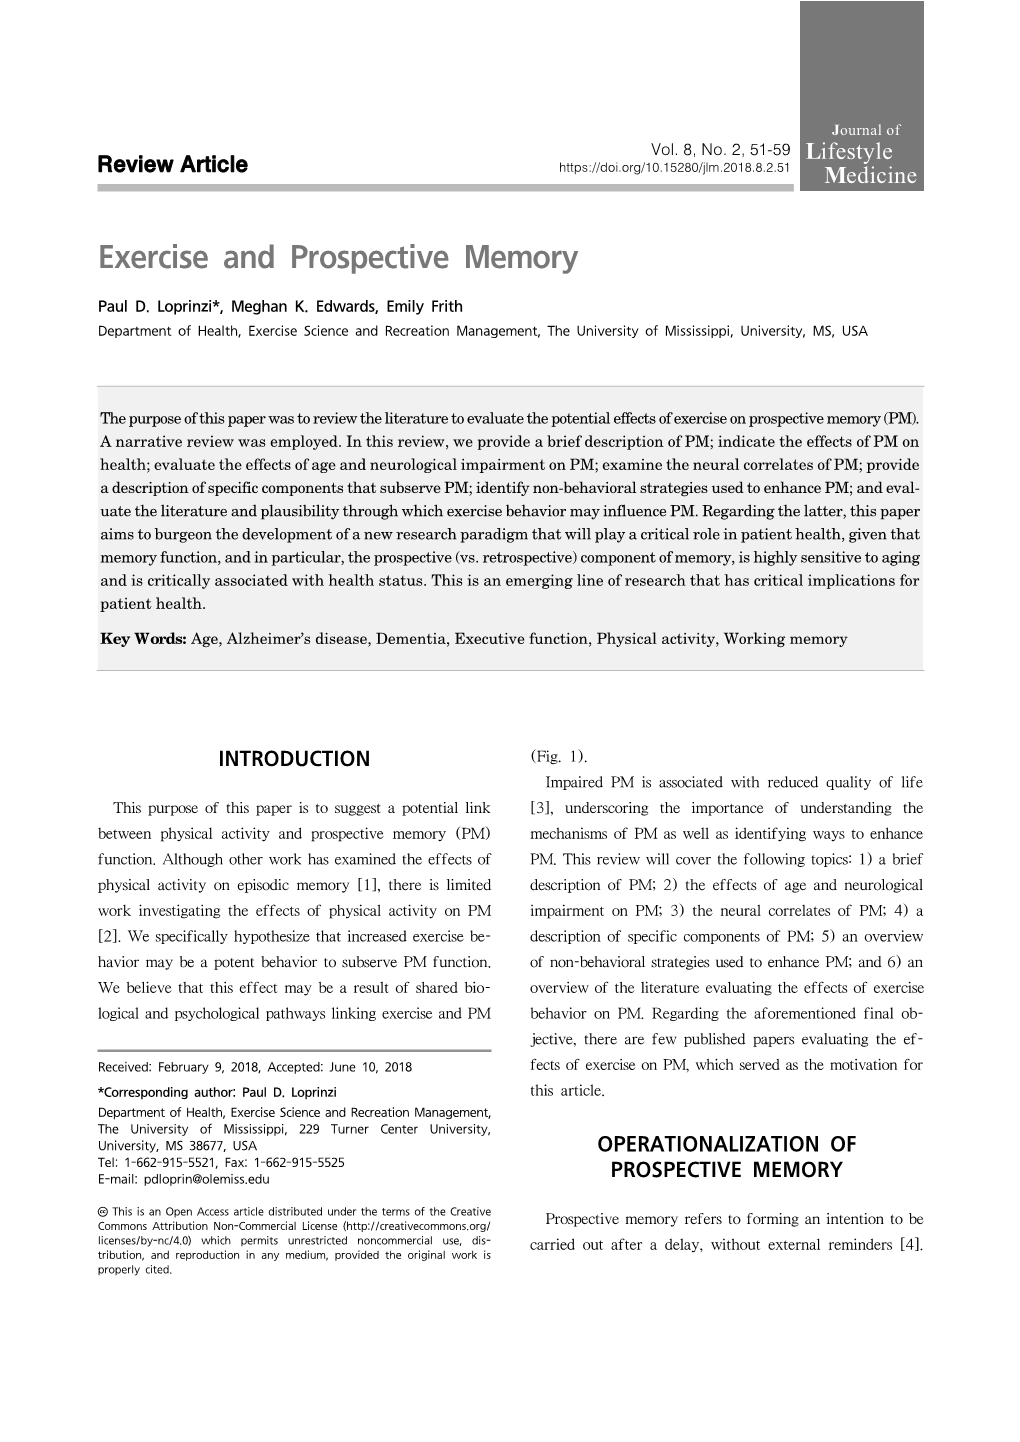 Exercise and Prospective Memory